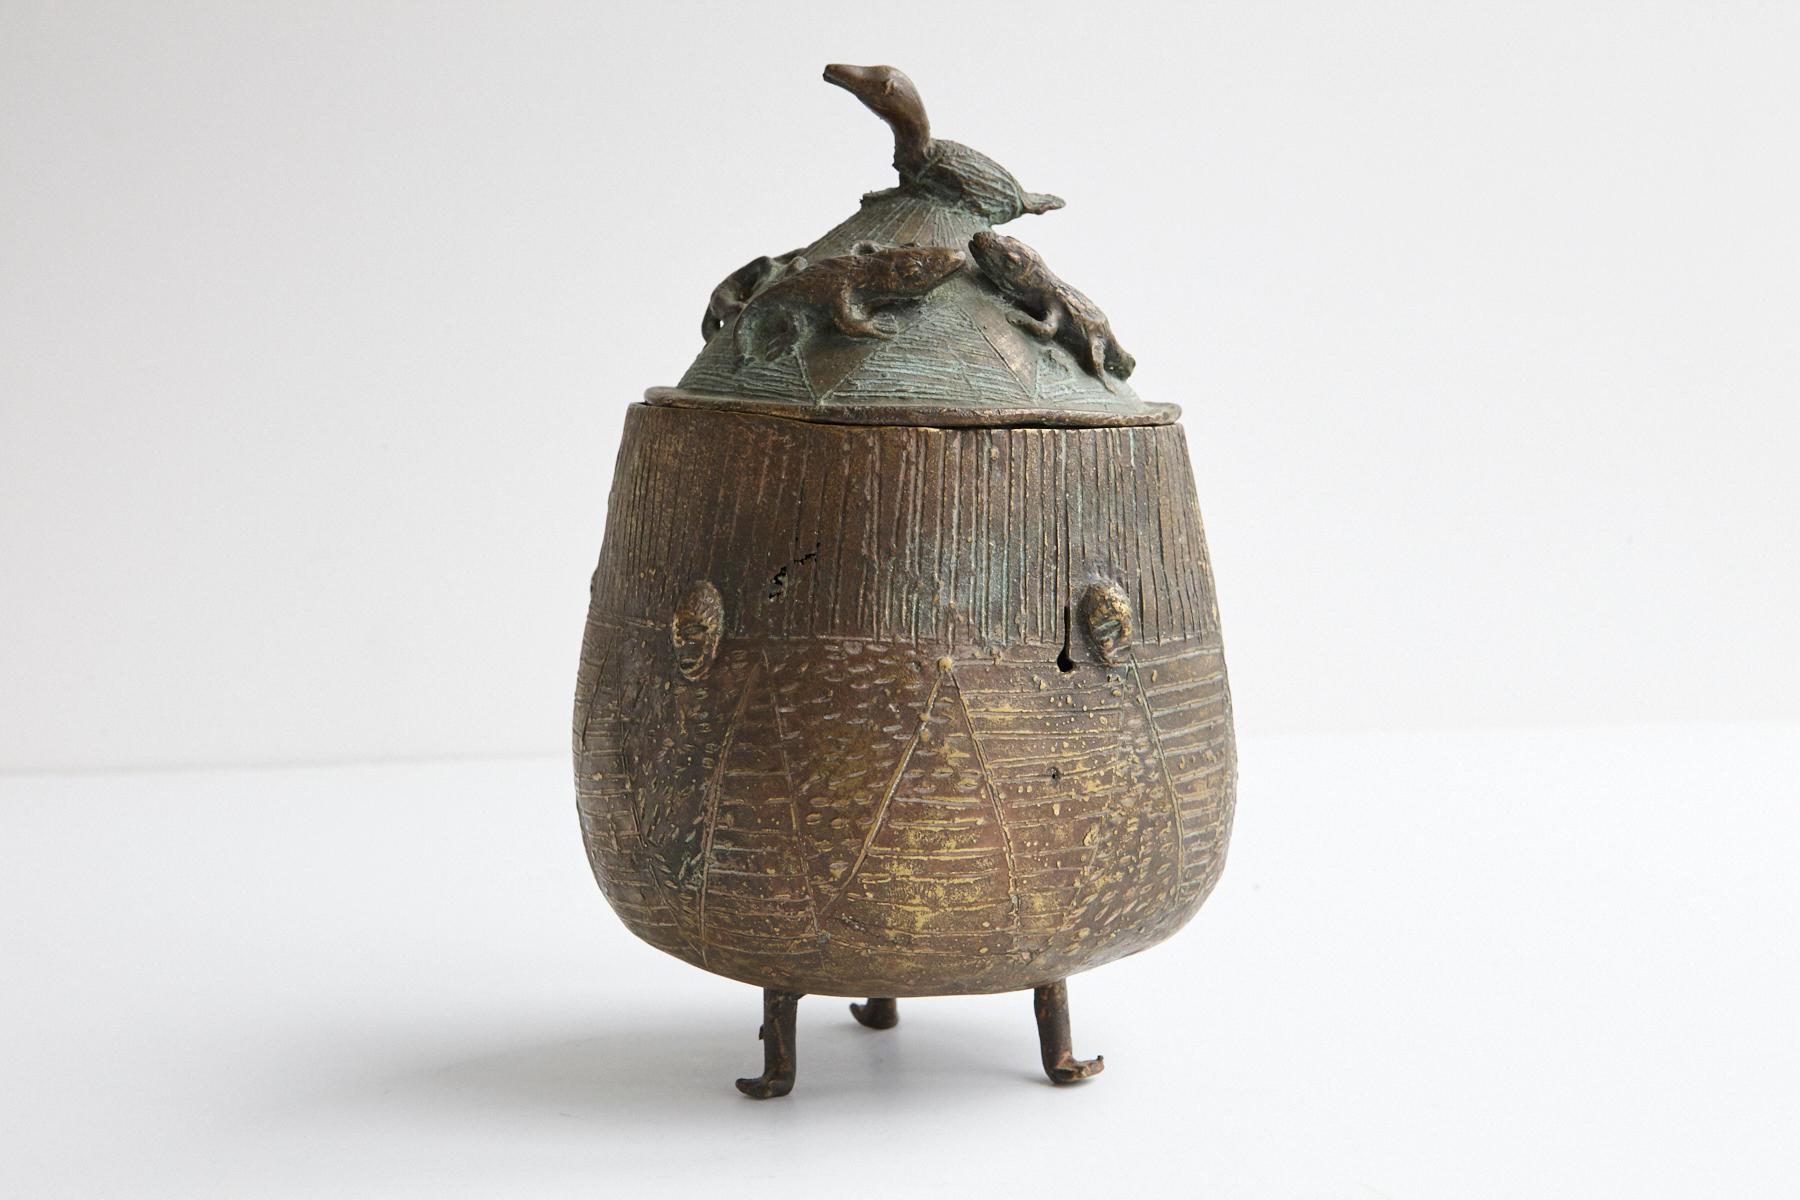 A beautiful bronze vessel, lidded pot on three legs, made by the Asante People, Ghana. Nicely cast lid with 4 reptiles and a bird. Several faces are depicted on the side of the vessel.
The so-called 